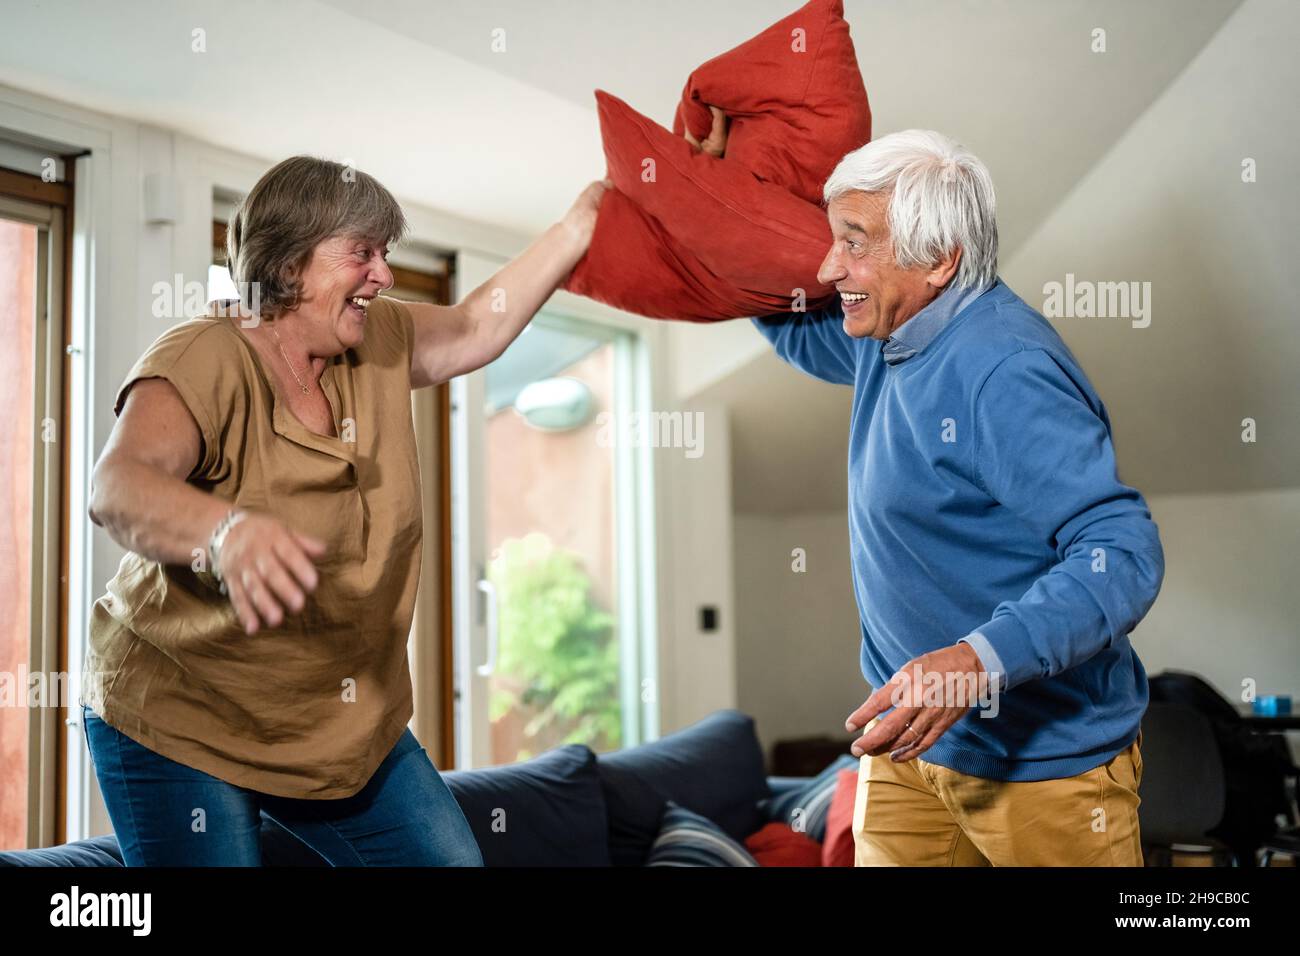 Playful and carefree senior couple making pillows fight in the middle of living room, leisure, lifestyle and happiness concept in silver age Stock Photo